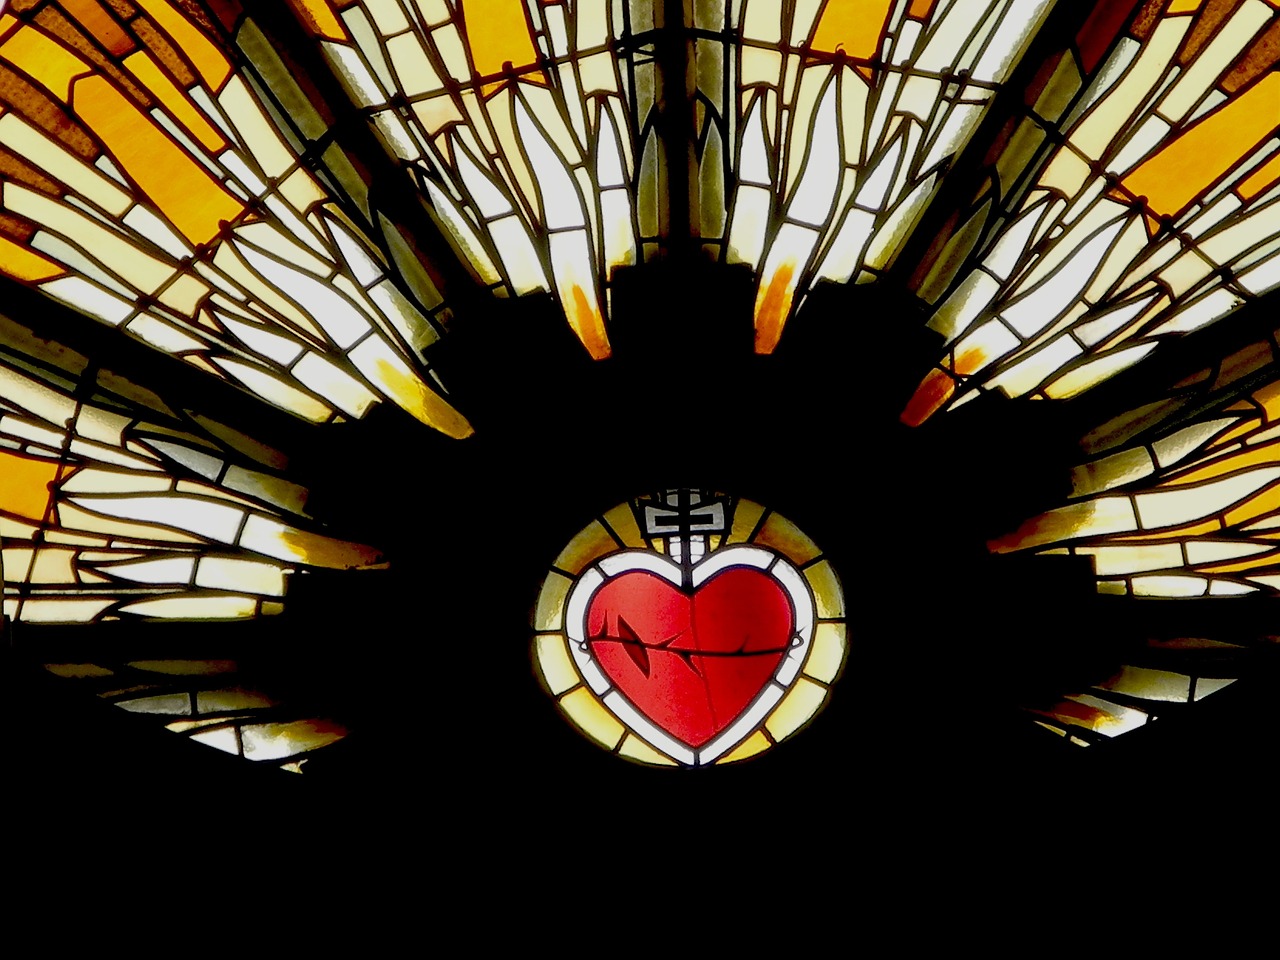 Church stained glass window with red heart 